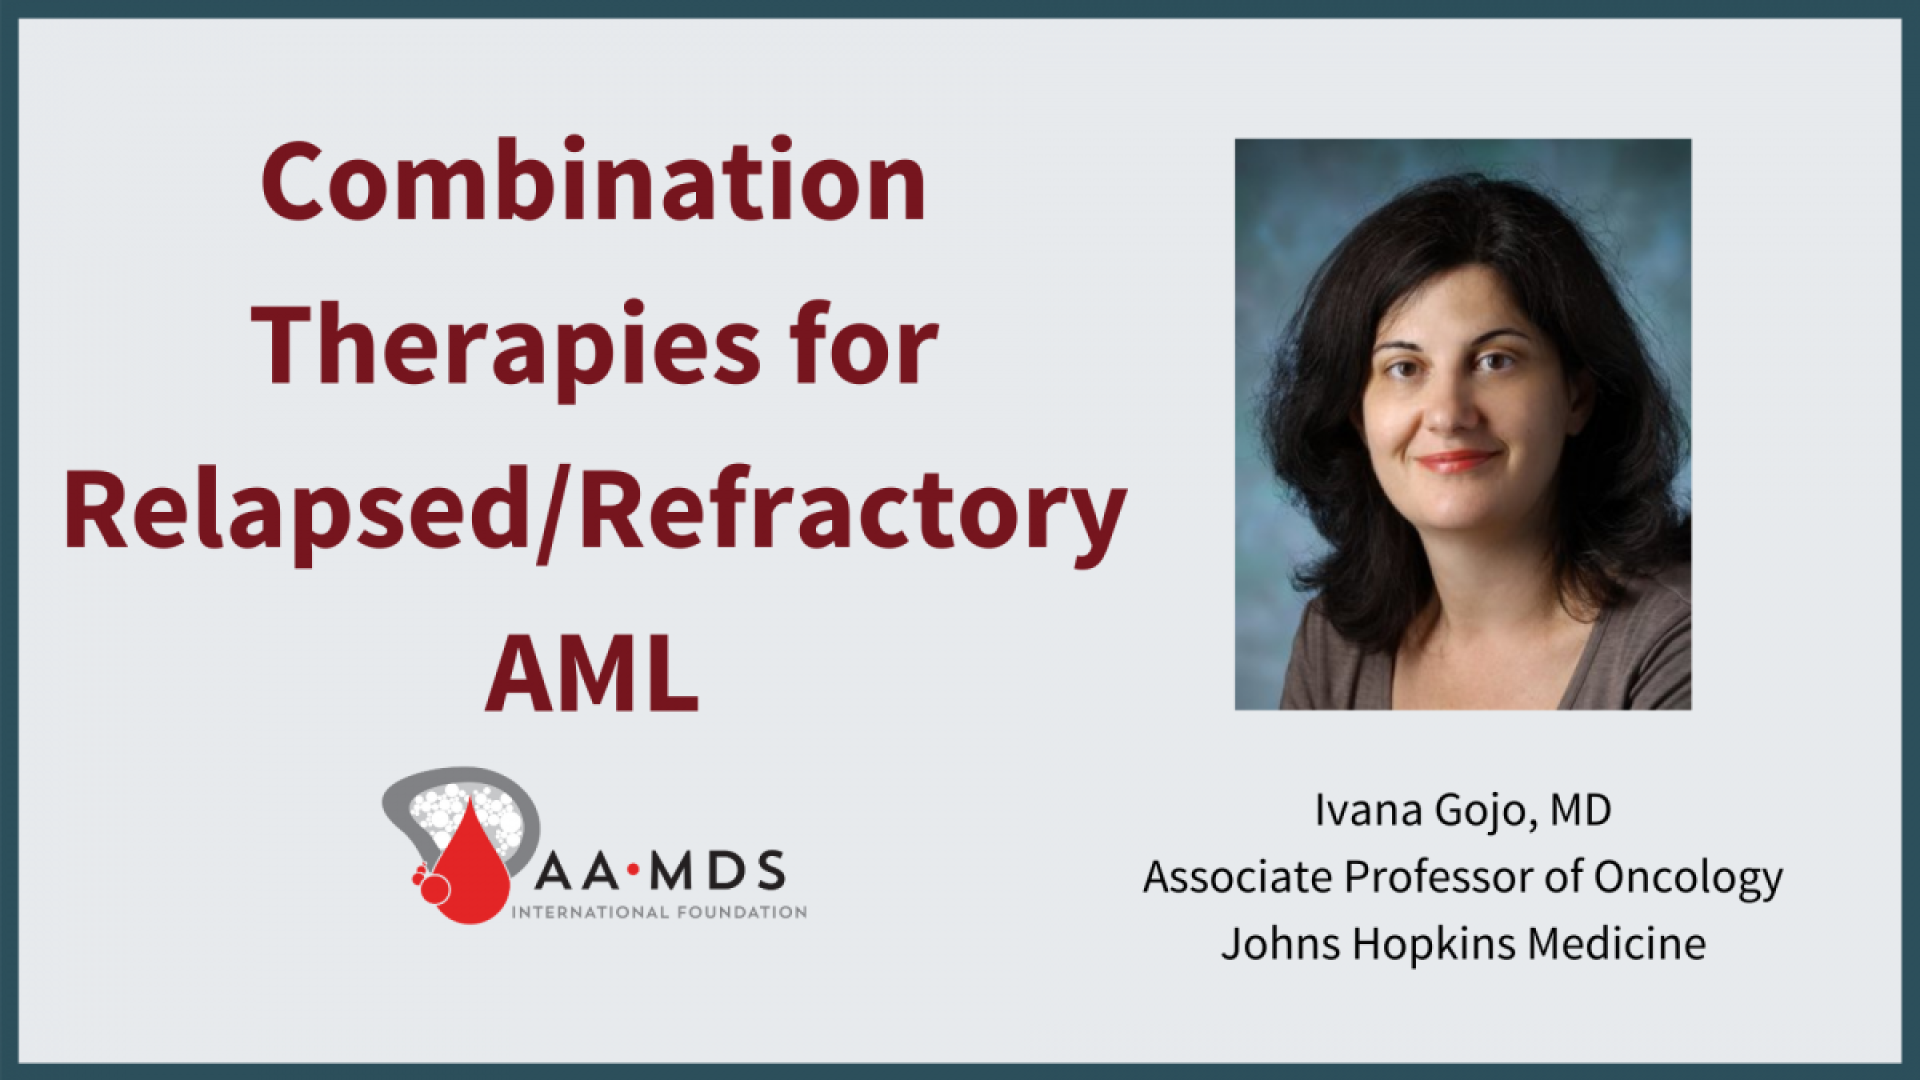 combination therapies in relapsed-refractory A-M-L